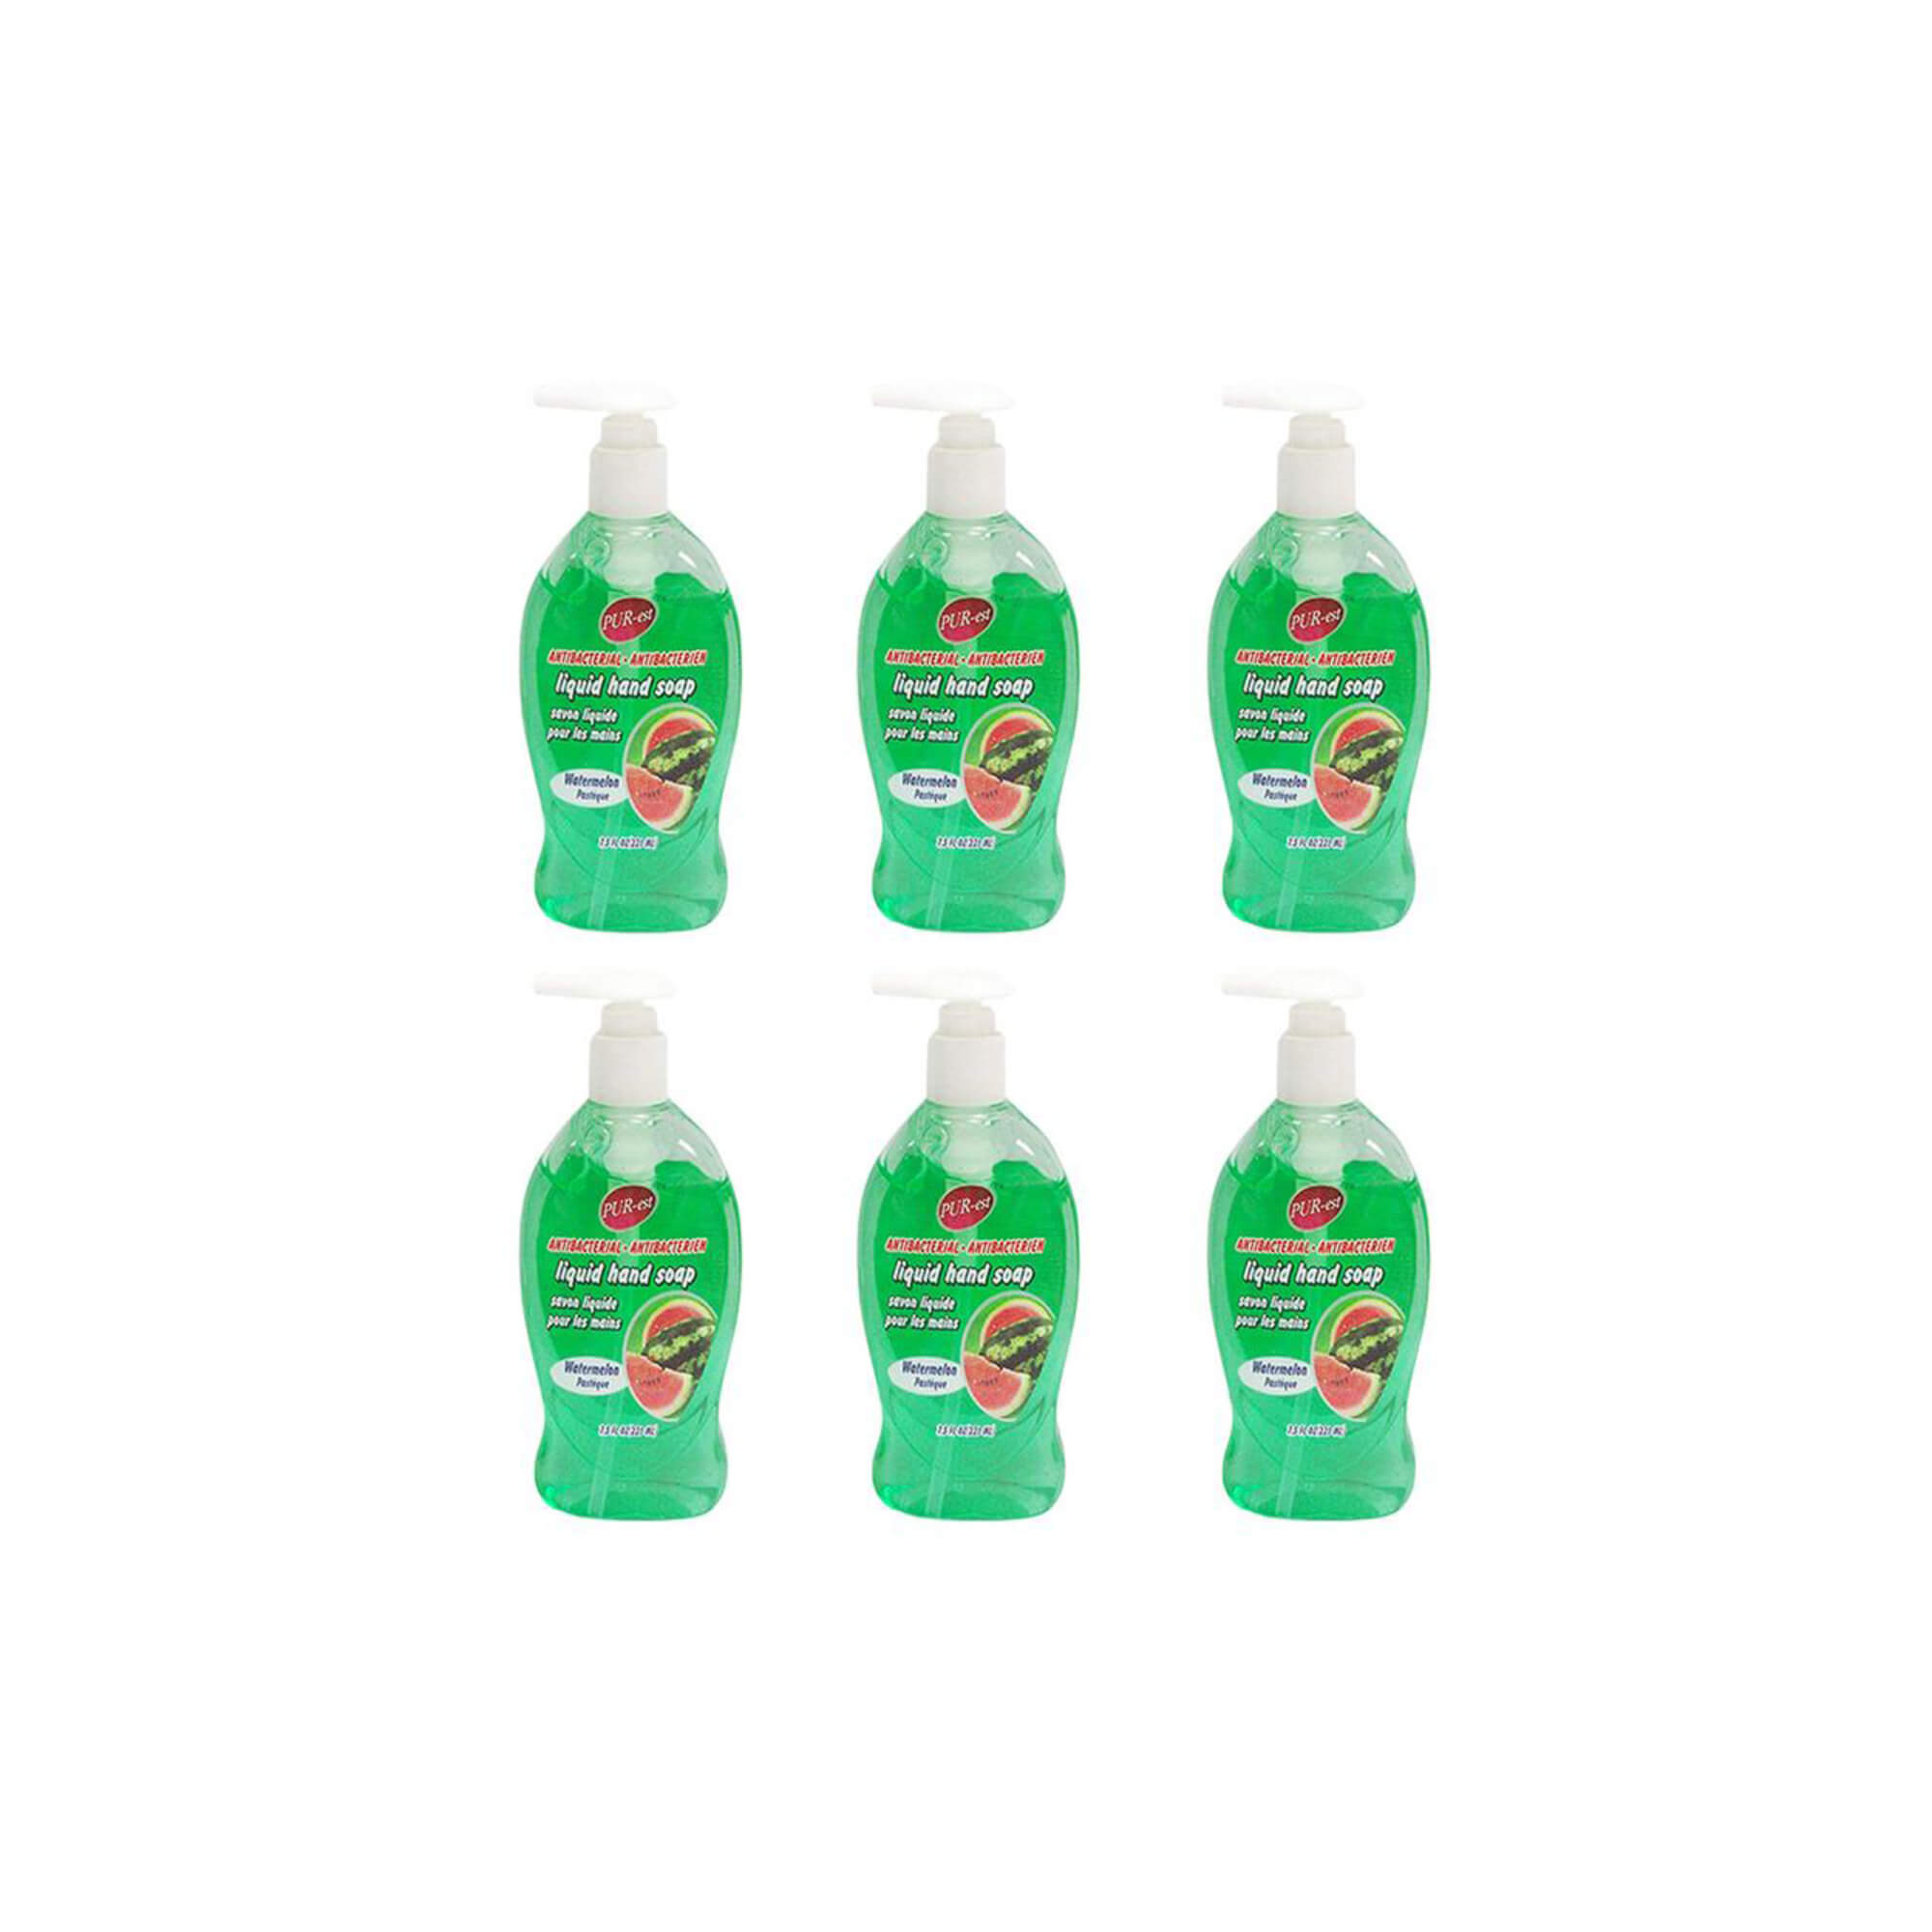 Purest Antibacterial Hand Soap, Watermelon, 221ml, Pack of 6